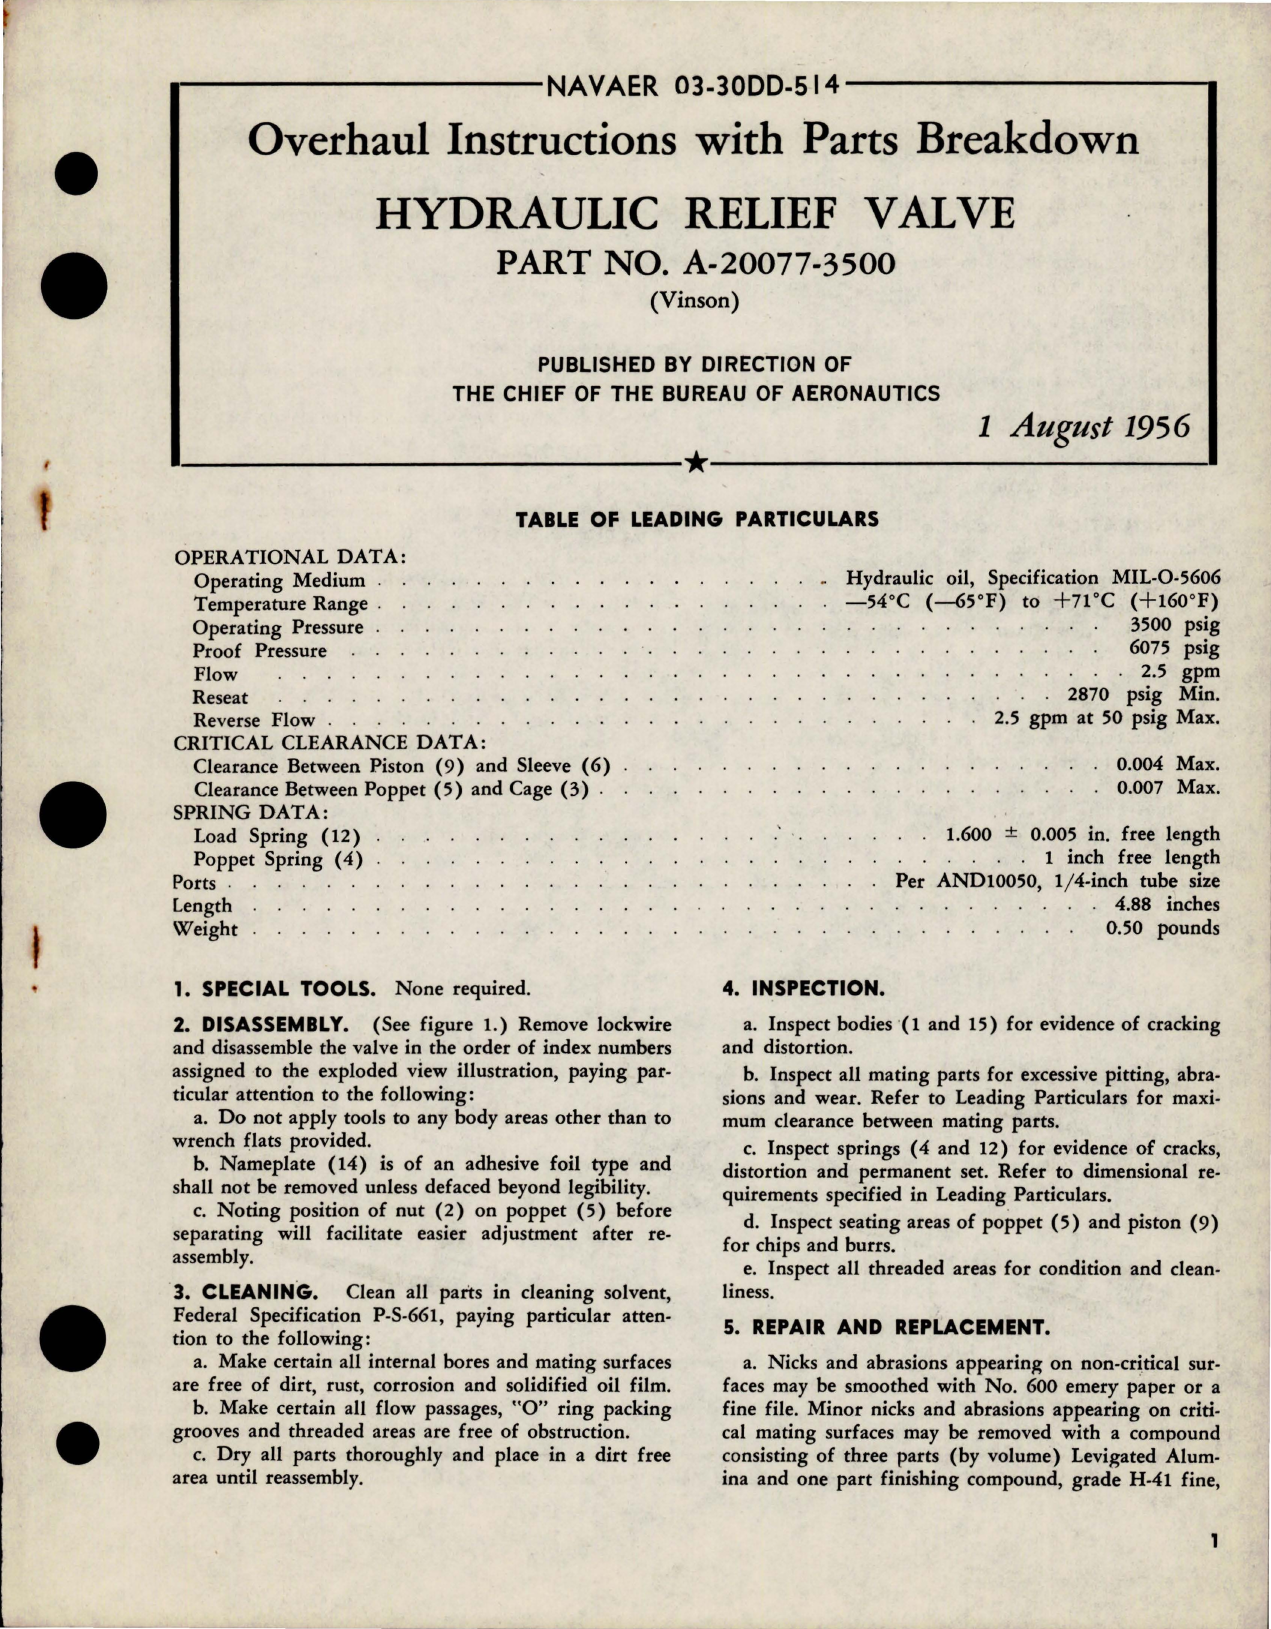 Sample page 1 from AirCorps Library document: Overhaul Instructions with Parts Breakdown for Hydraulic Relief Valve - Part A-20077-3500 